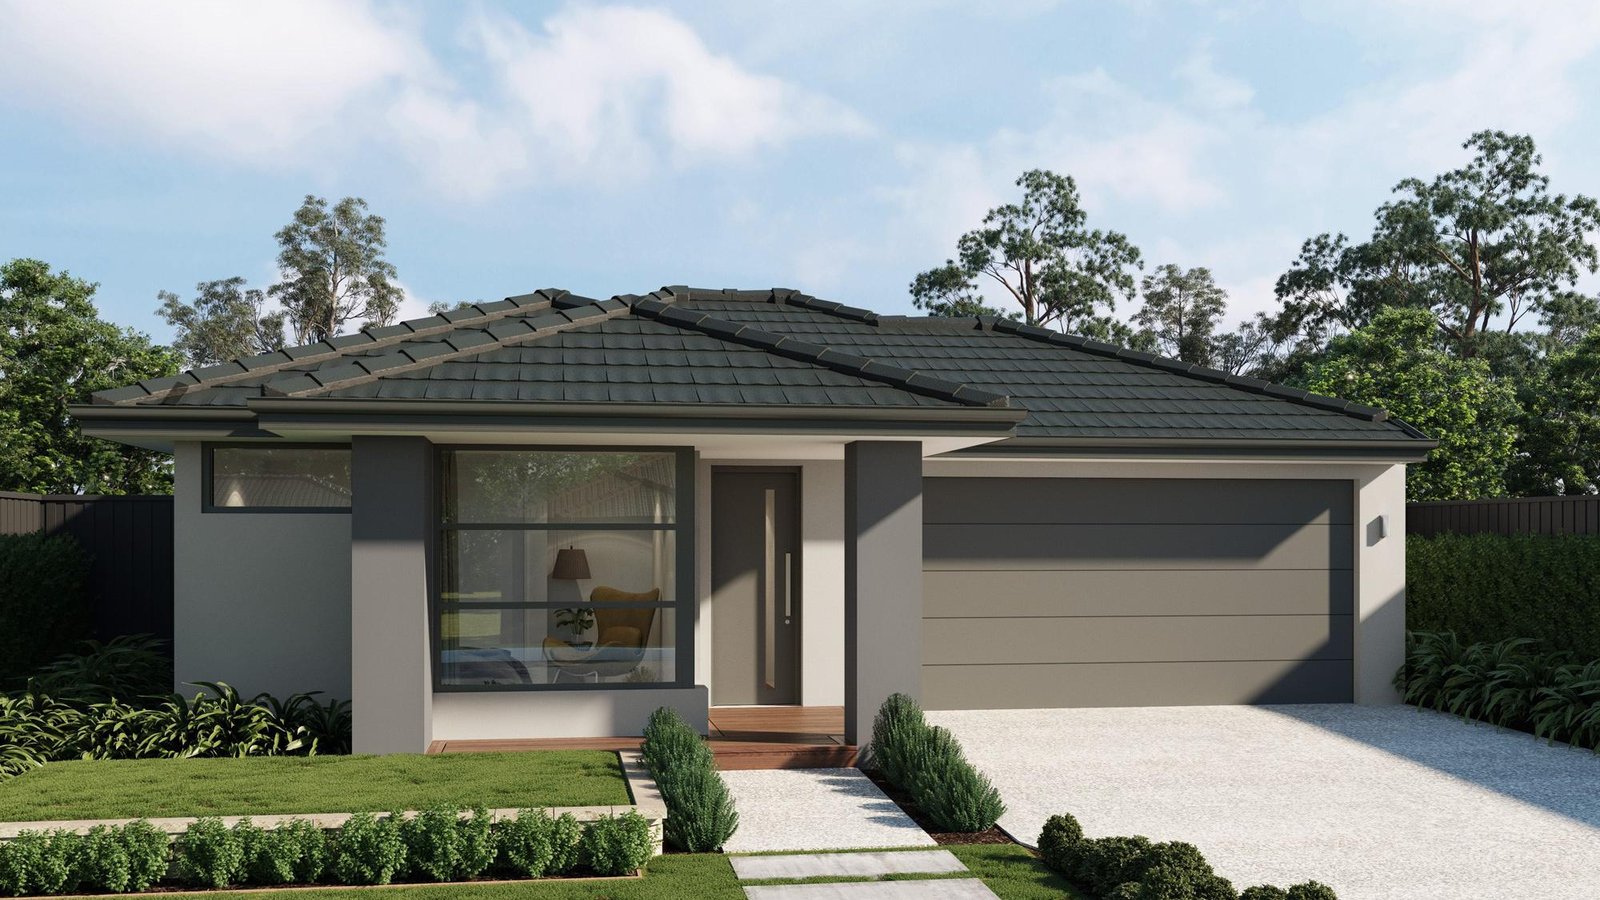 Photo of Lot 713 Whitewing Street, Armstrong Creek VIC 3217 AUS